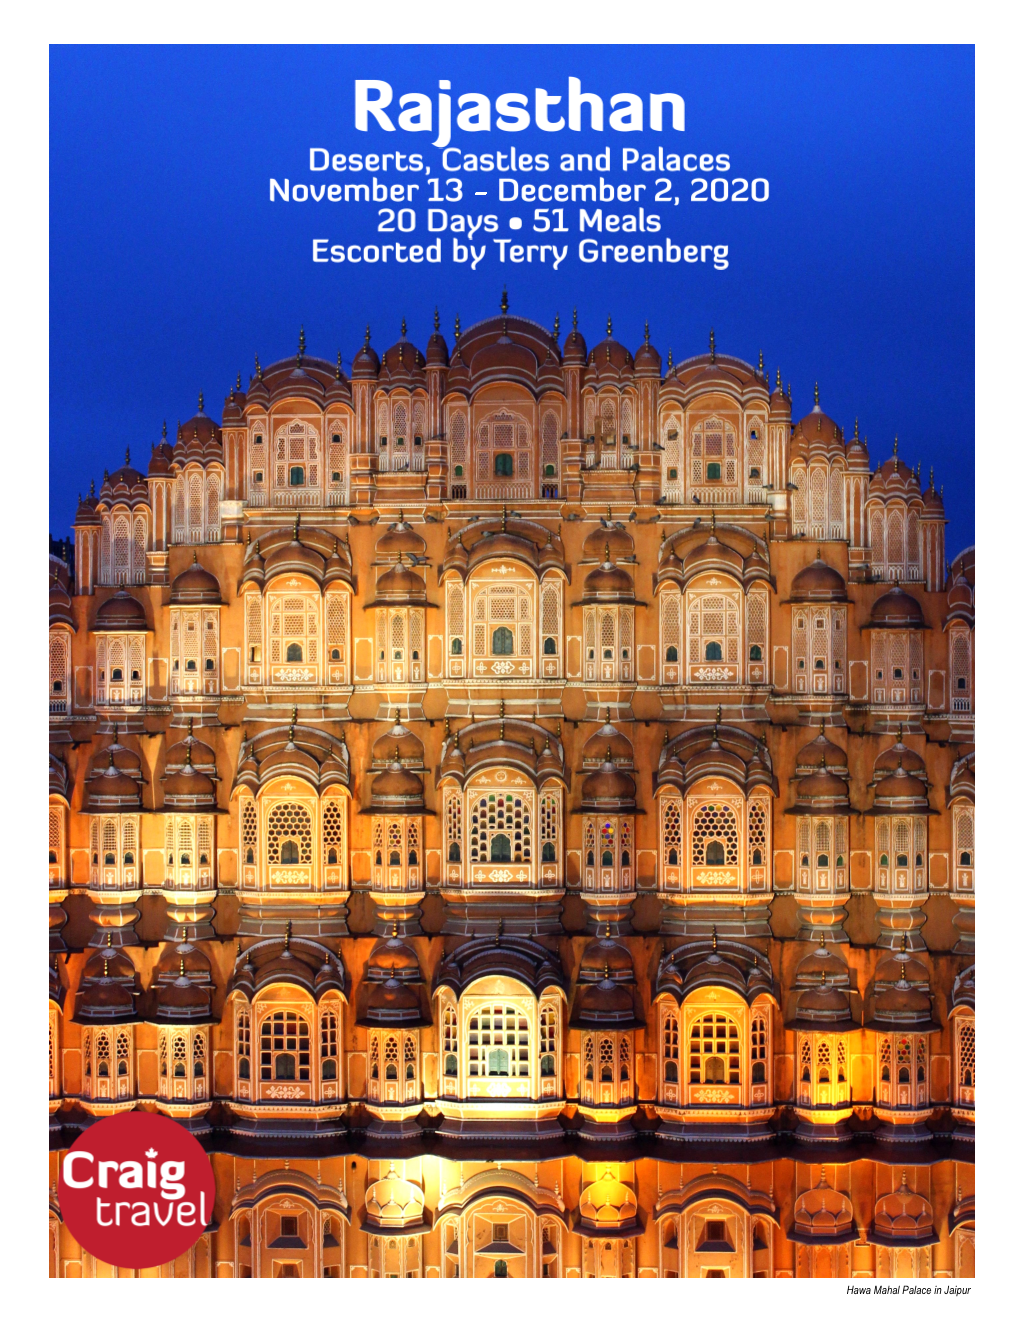 Hawa Mahal Palace in Jaipur India Has Long Fascinated World Travellers for Its Immense Diversity